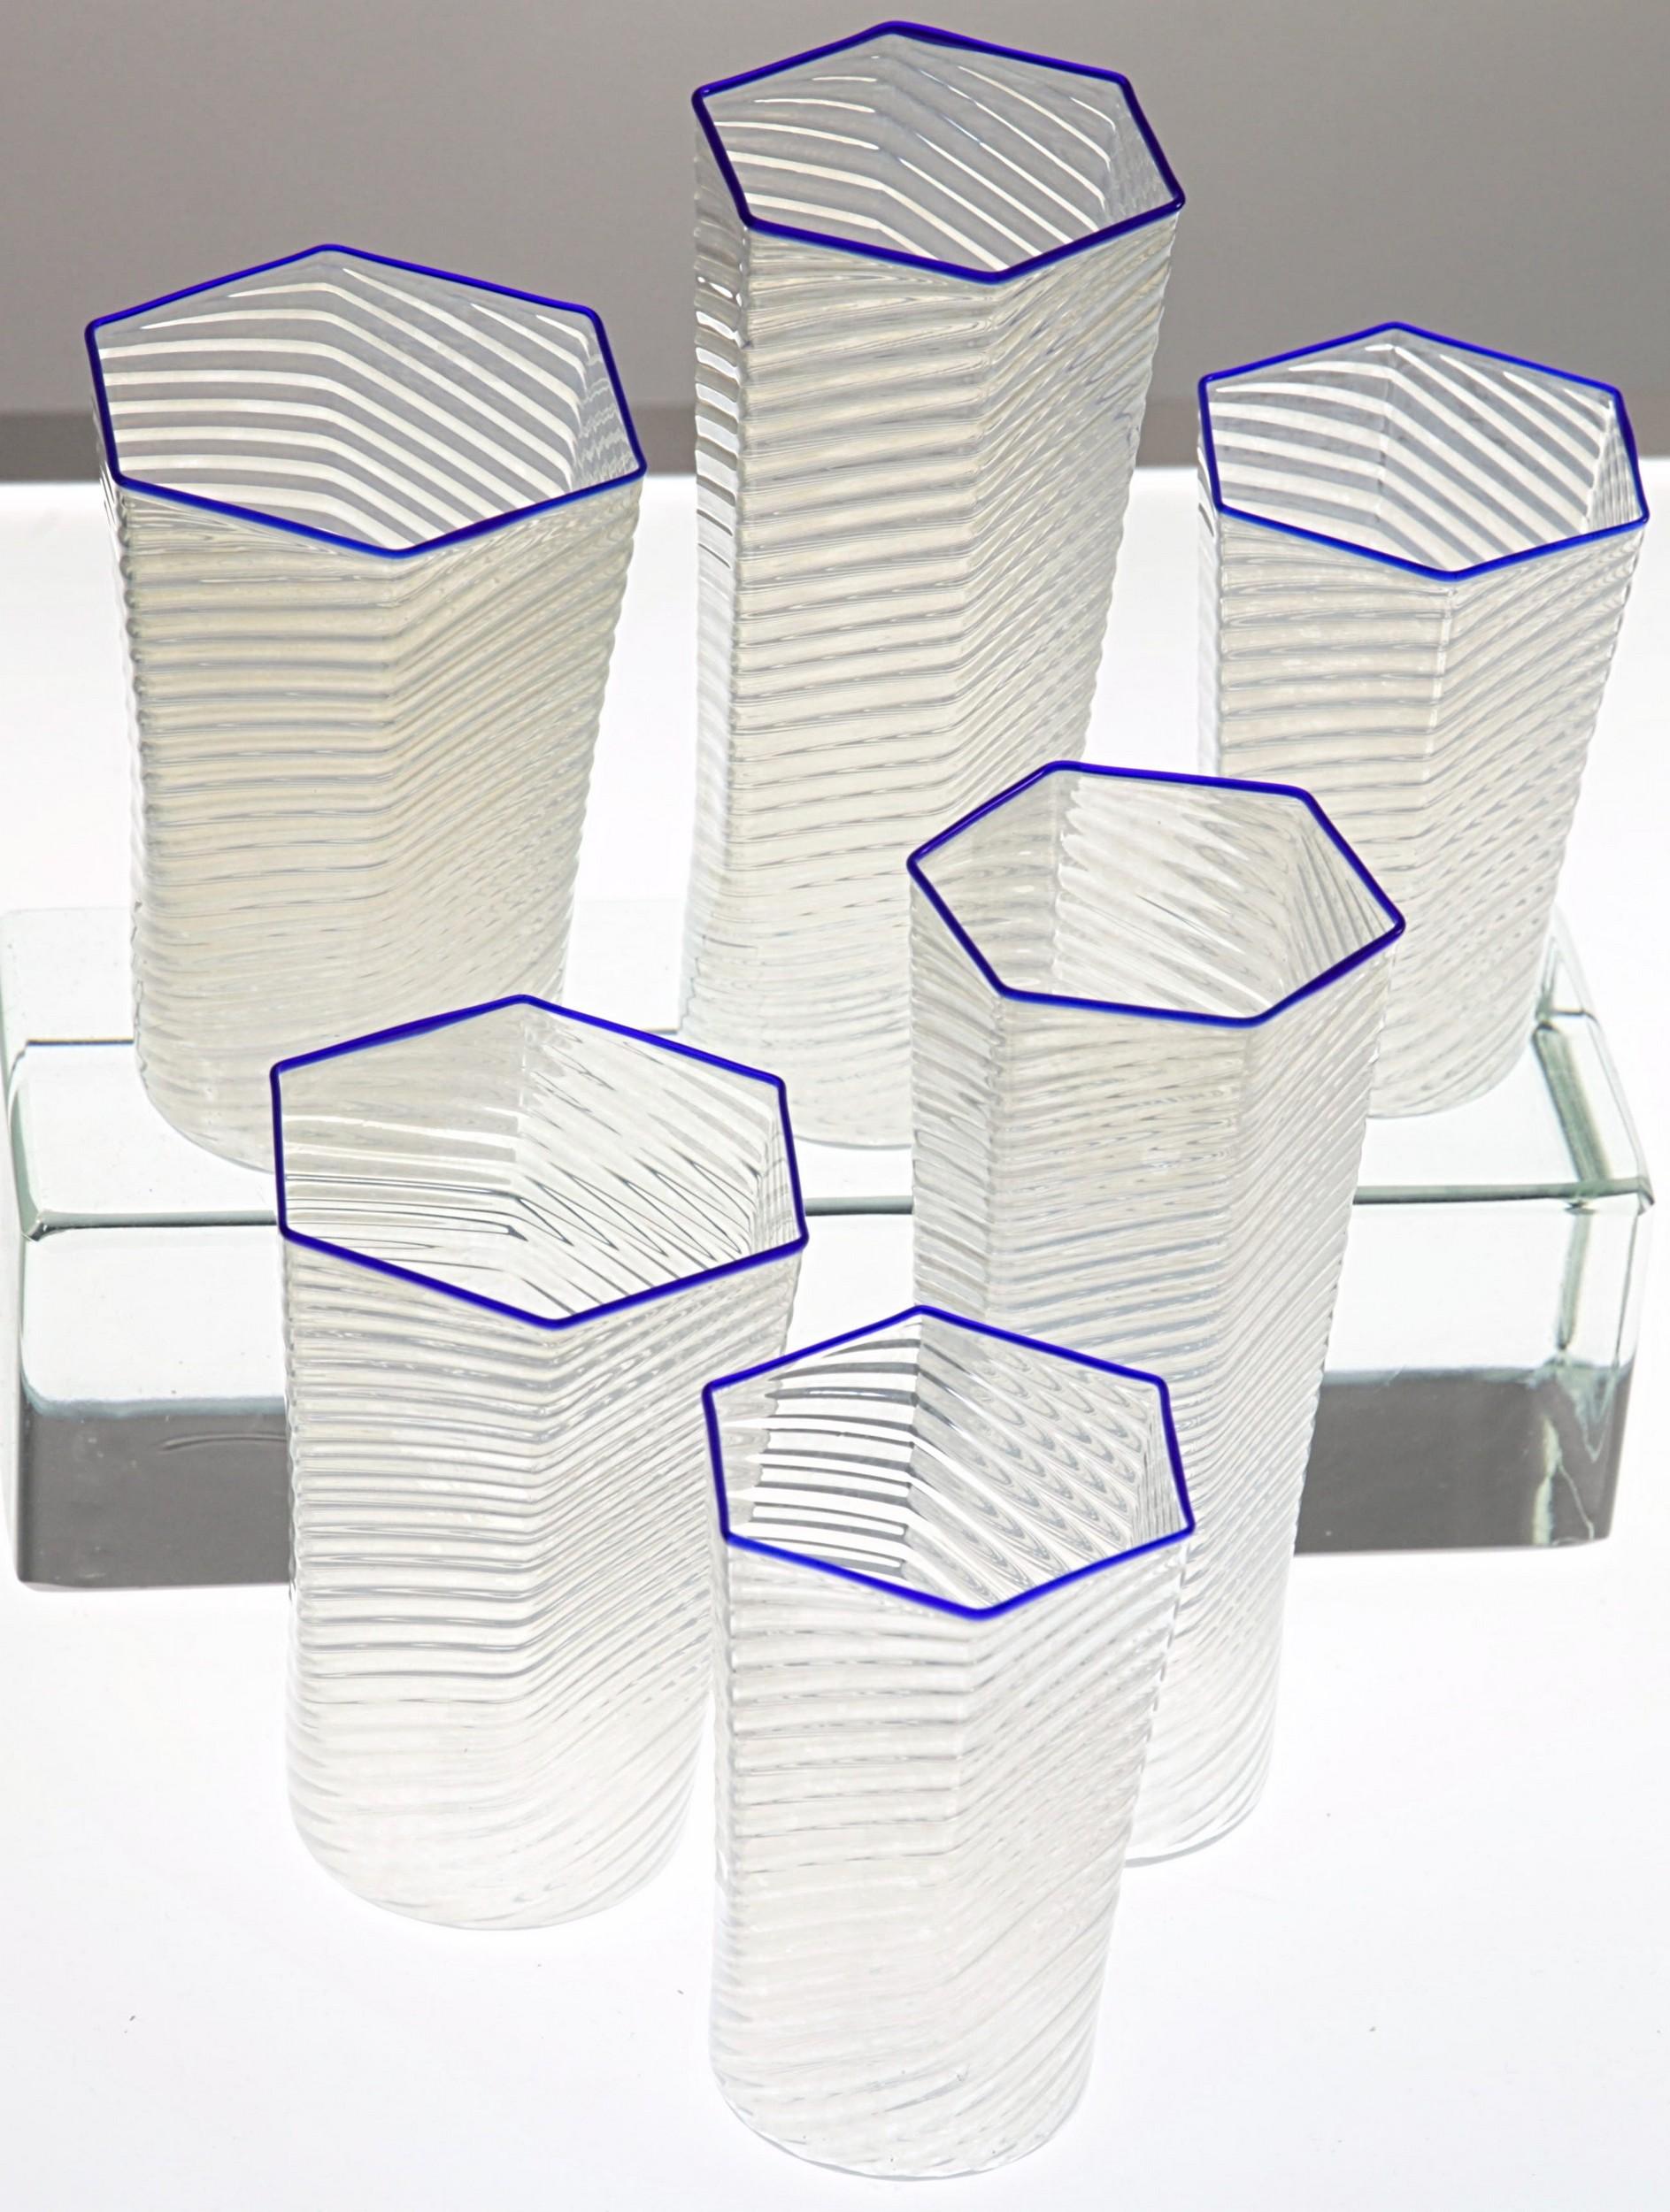 Incredible set of 30 hexagonal light glasses finely ribbed in spirals. It's called rigadin ritorto or mena' in Muranese glass world. Cobalt blue rim.

Extremely light. Egg skin thickness. Very elegant and incredible to touch and weight. A perfect